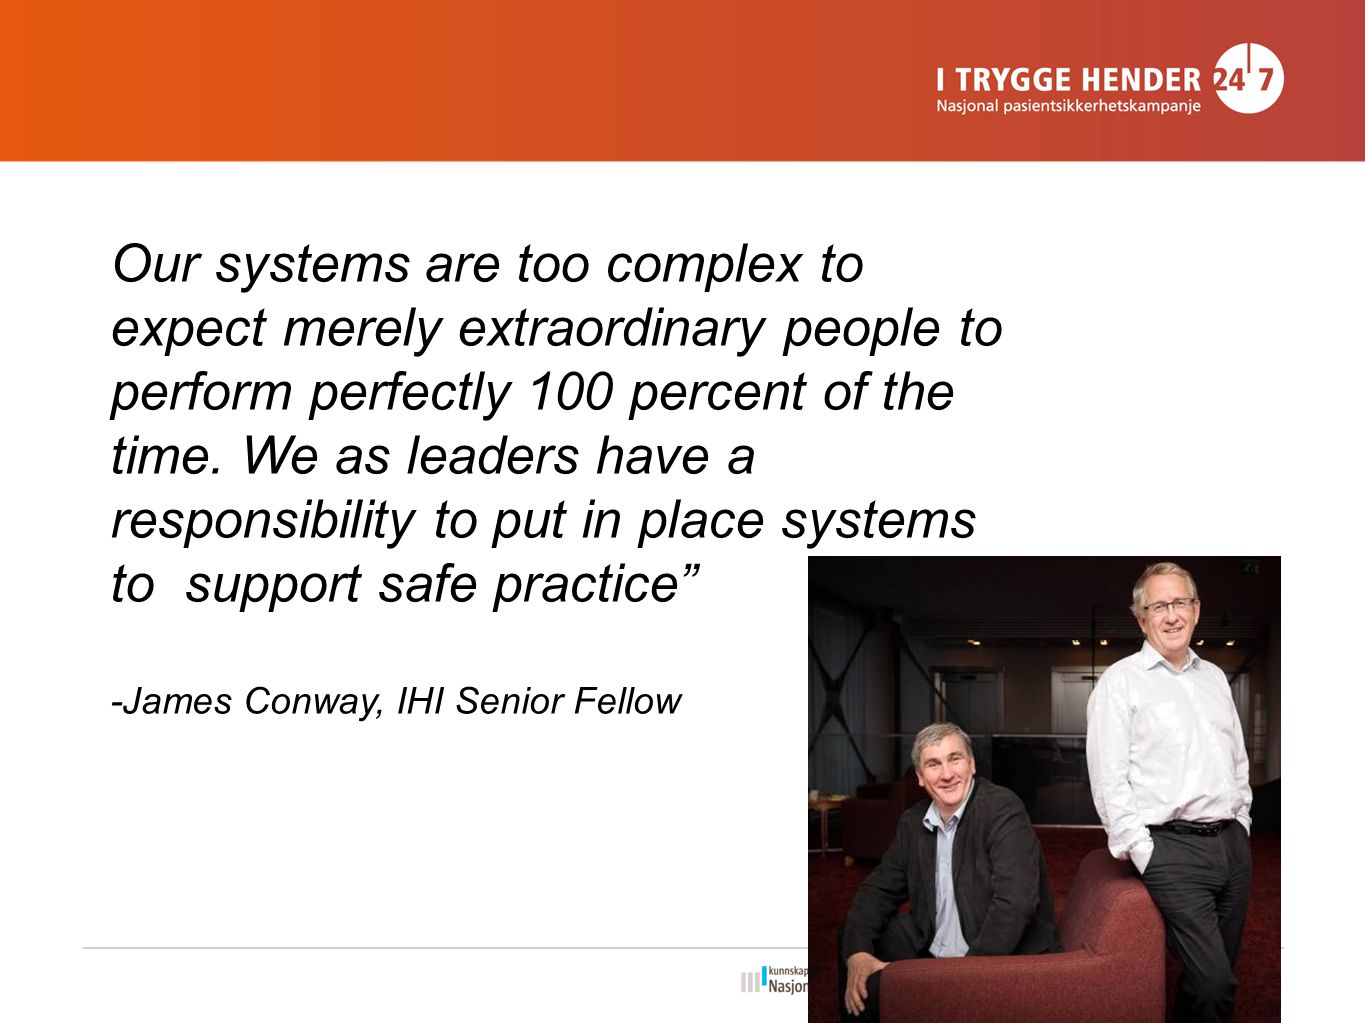 Our systems are too complex to expect merely extraordinary people to perform perfectly 100 percent of the time.